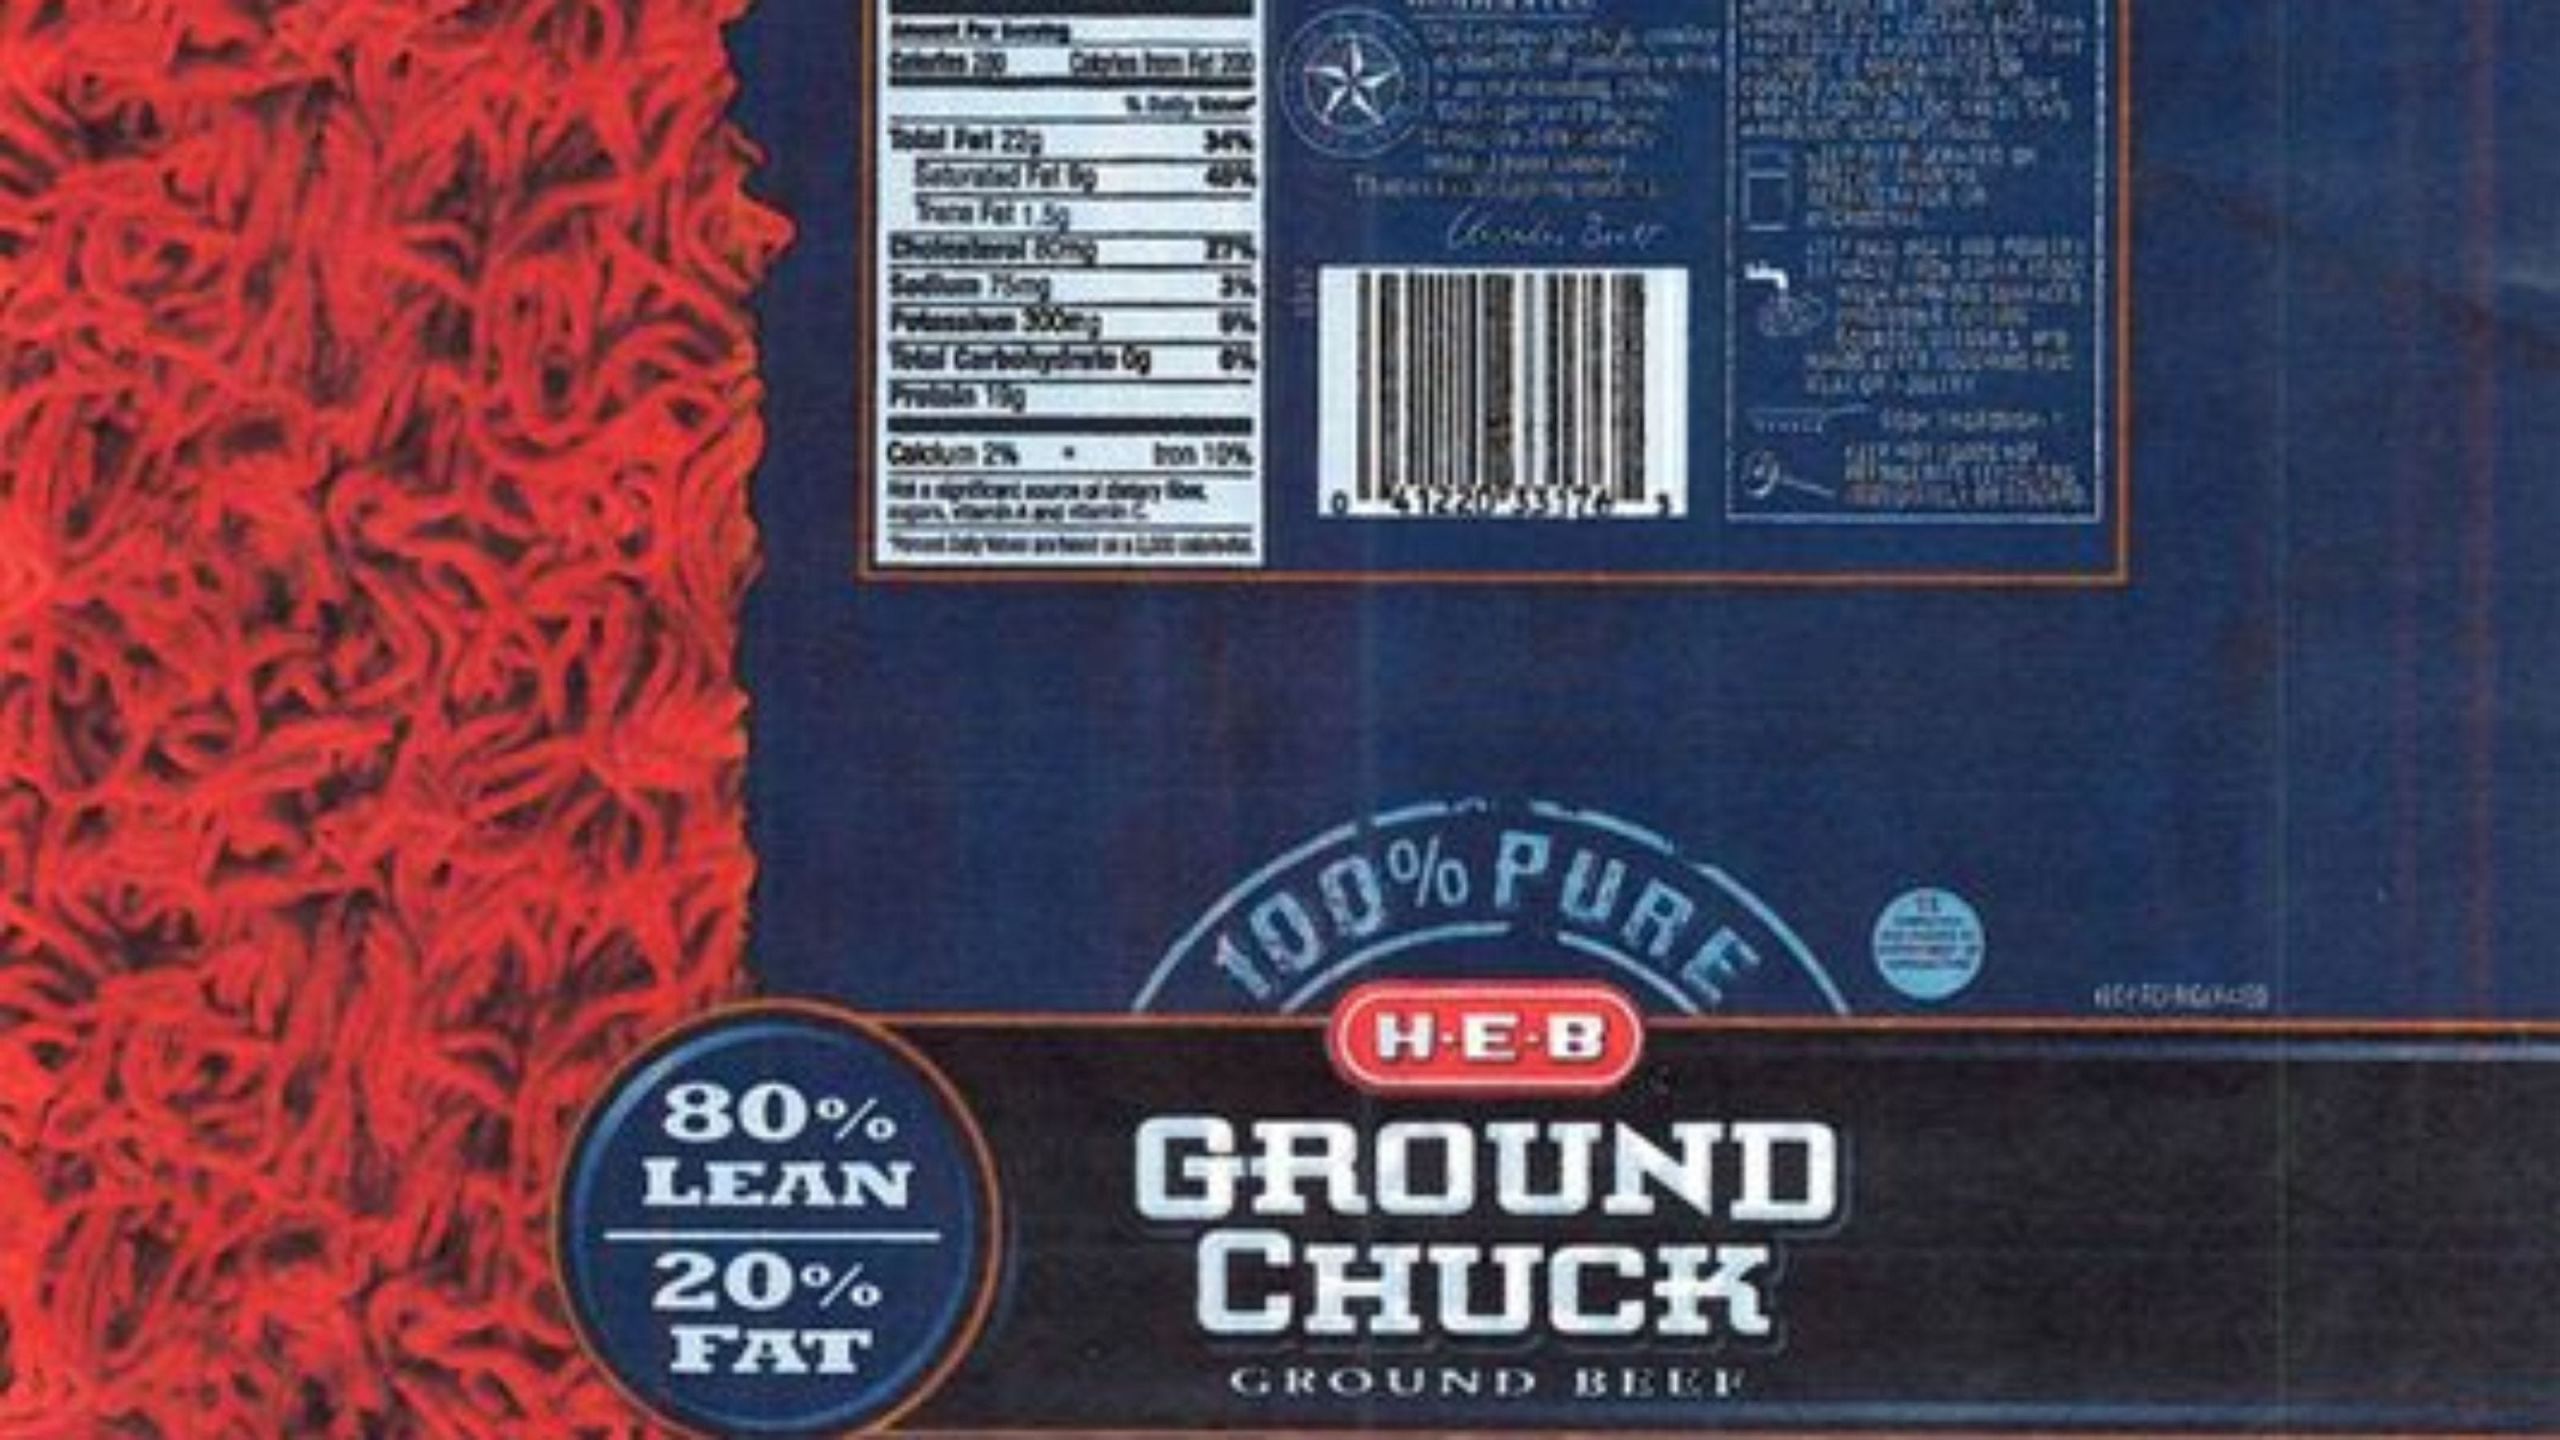 Heb Ground Beef
 HEB brand ground beef may be tainted with metal